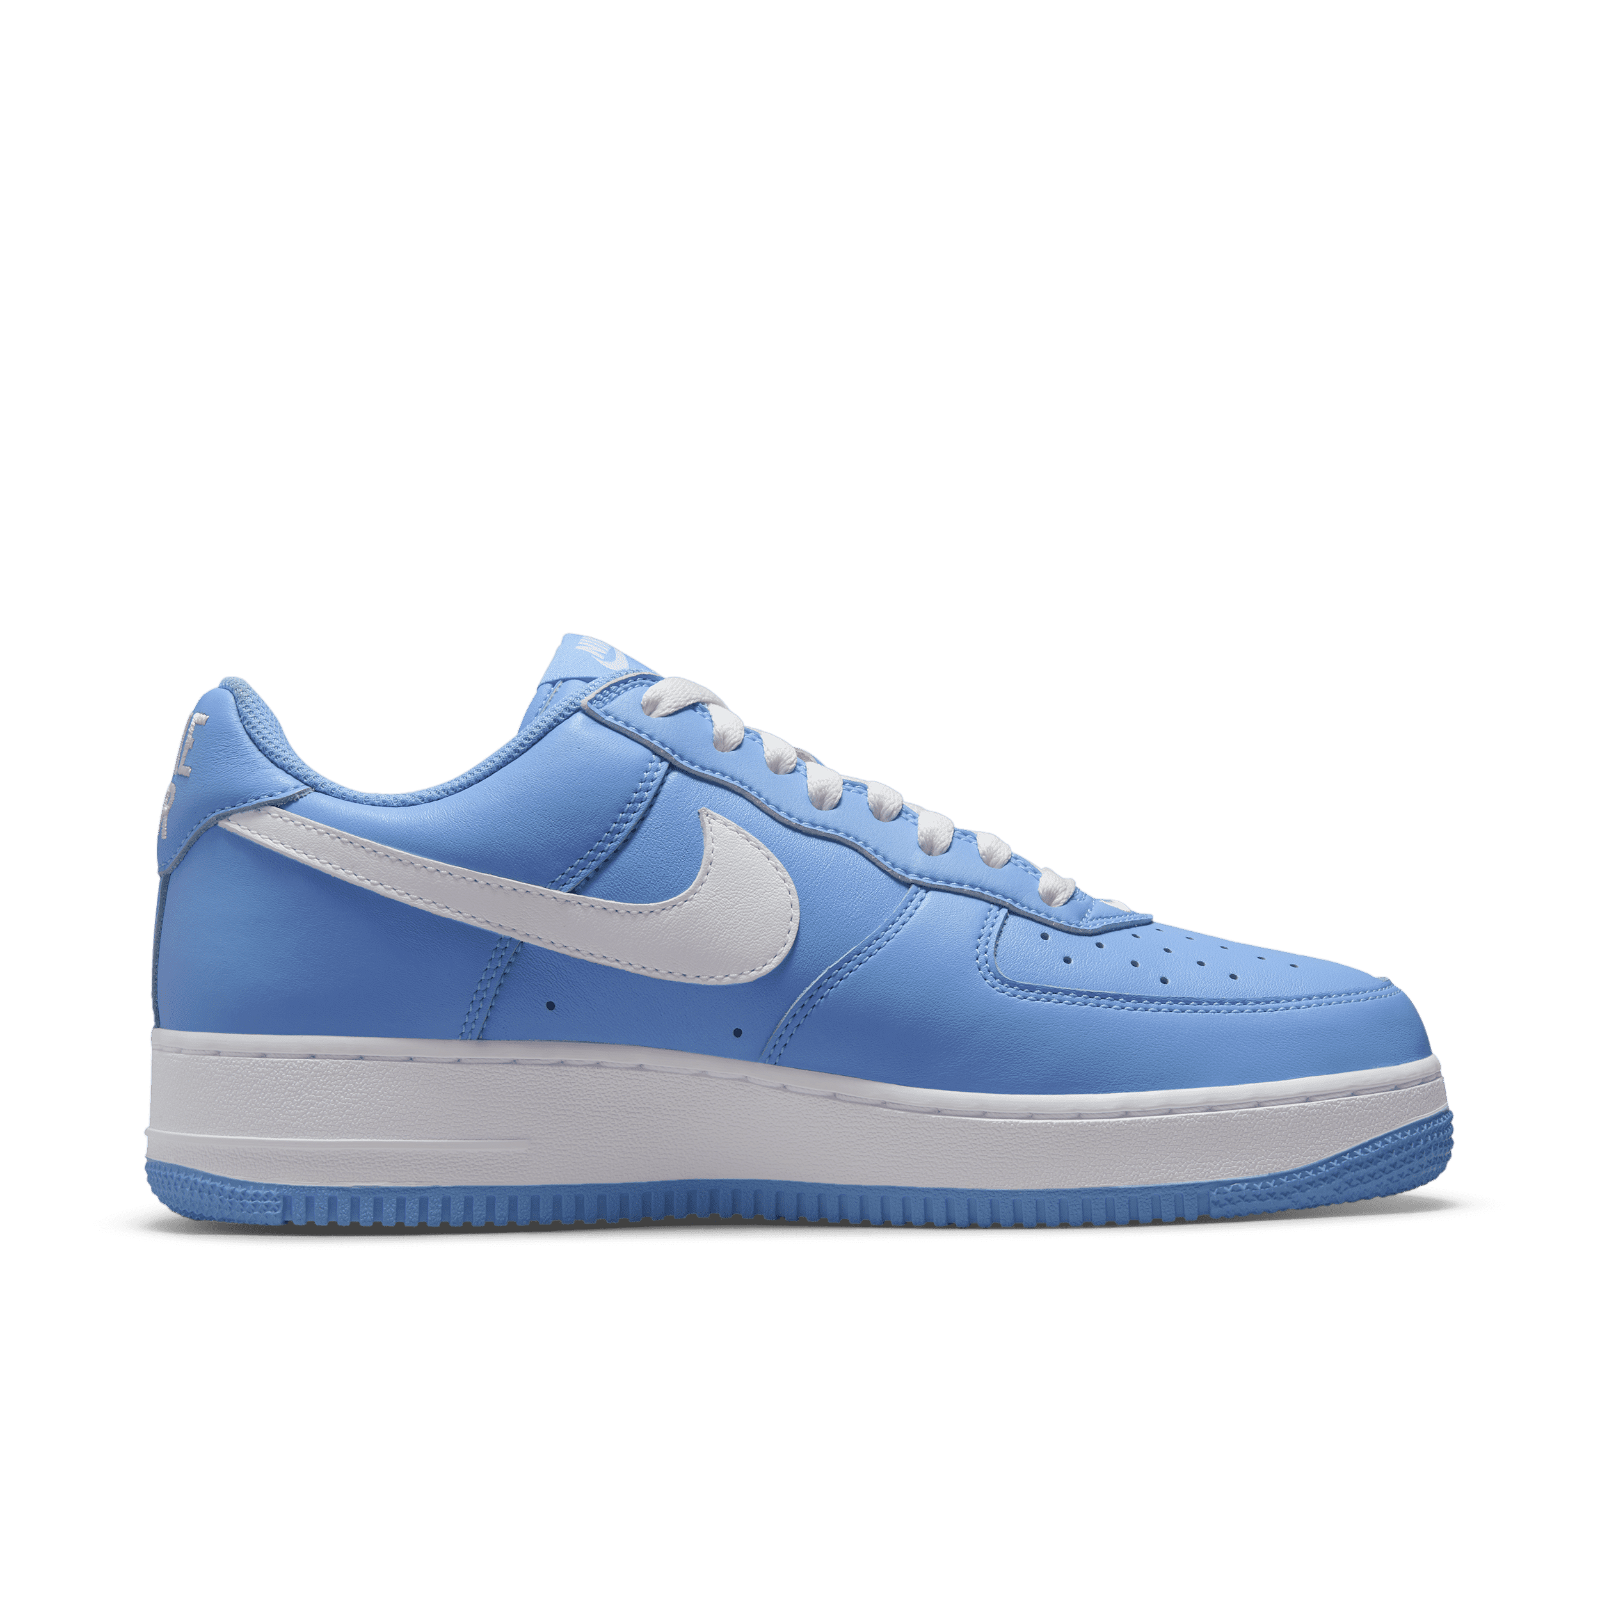 Air Force 1 Low '07 Retro 40th Anniversary Edition "University Blue"